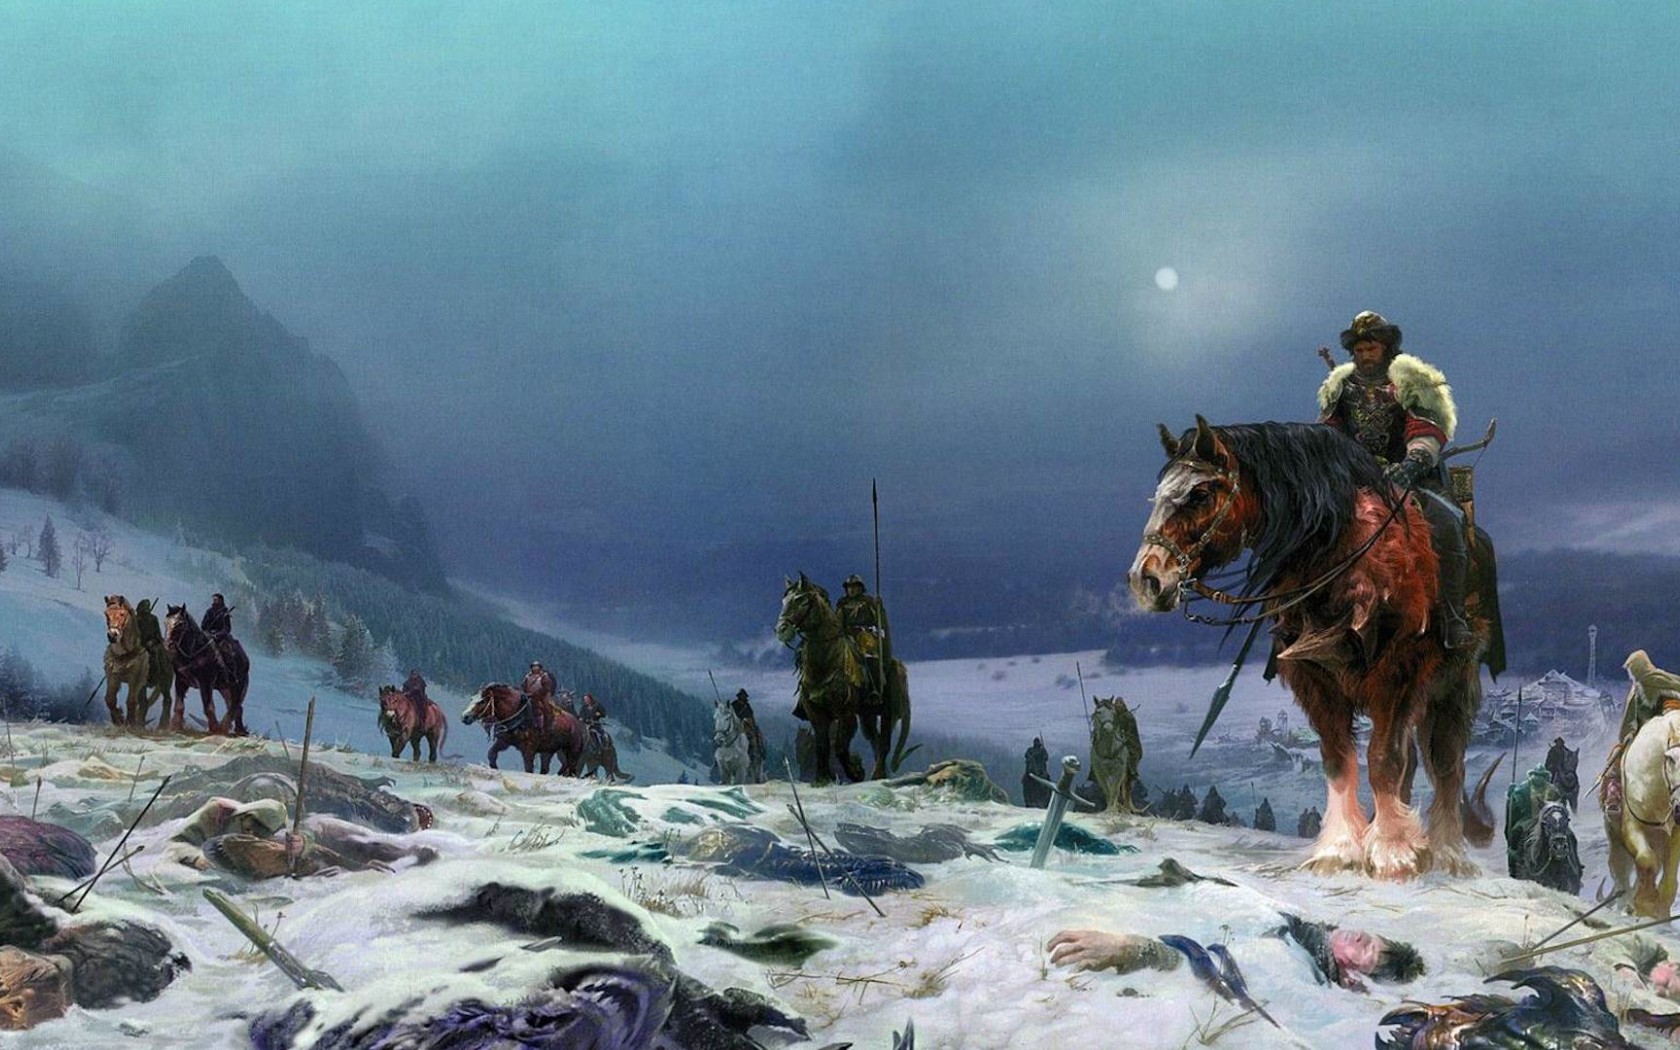 earth, Without, Joy, Nick, Perumov, Annals, Hervarda, Fantasy, Moon, Soldiers, Horses, Winter, Snow, Scene, Of, The, Battle, Drawing, Art Wallpaper